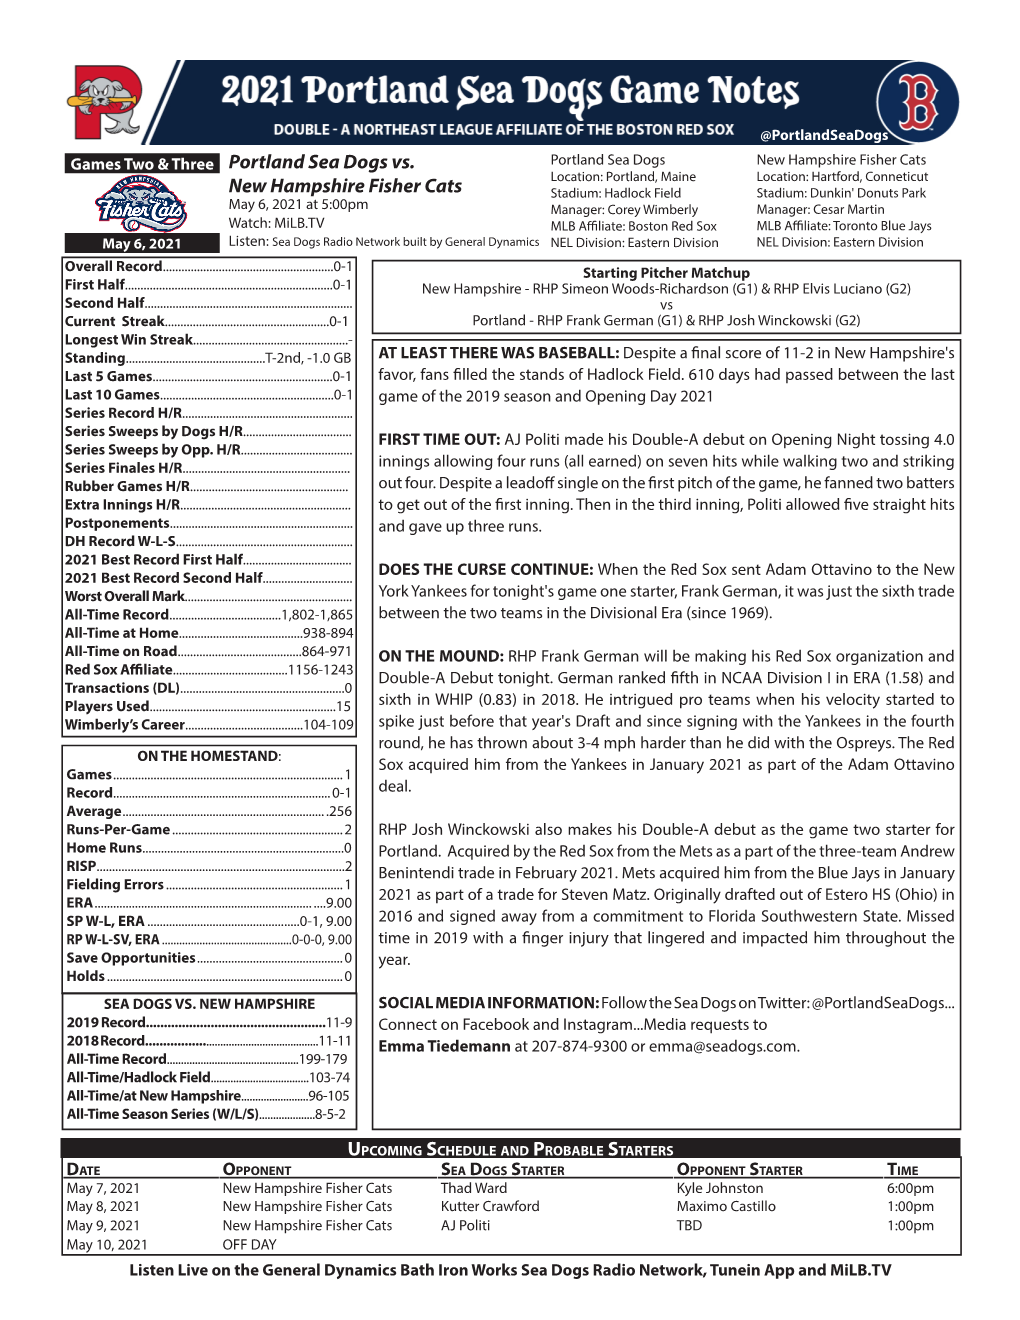 Game Notes Sea Dogs Staring Pitcher - #10 Frank German